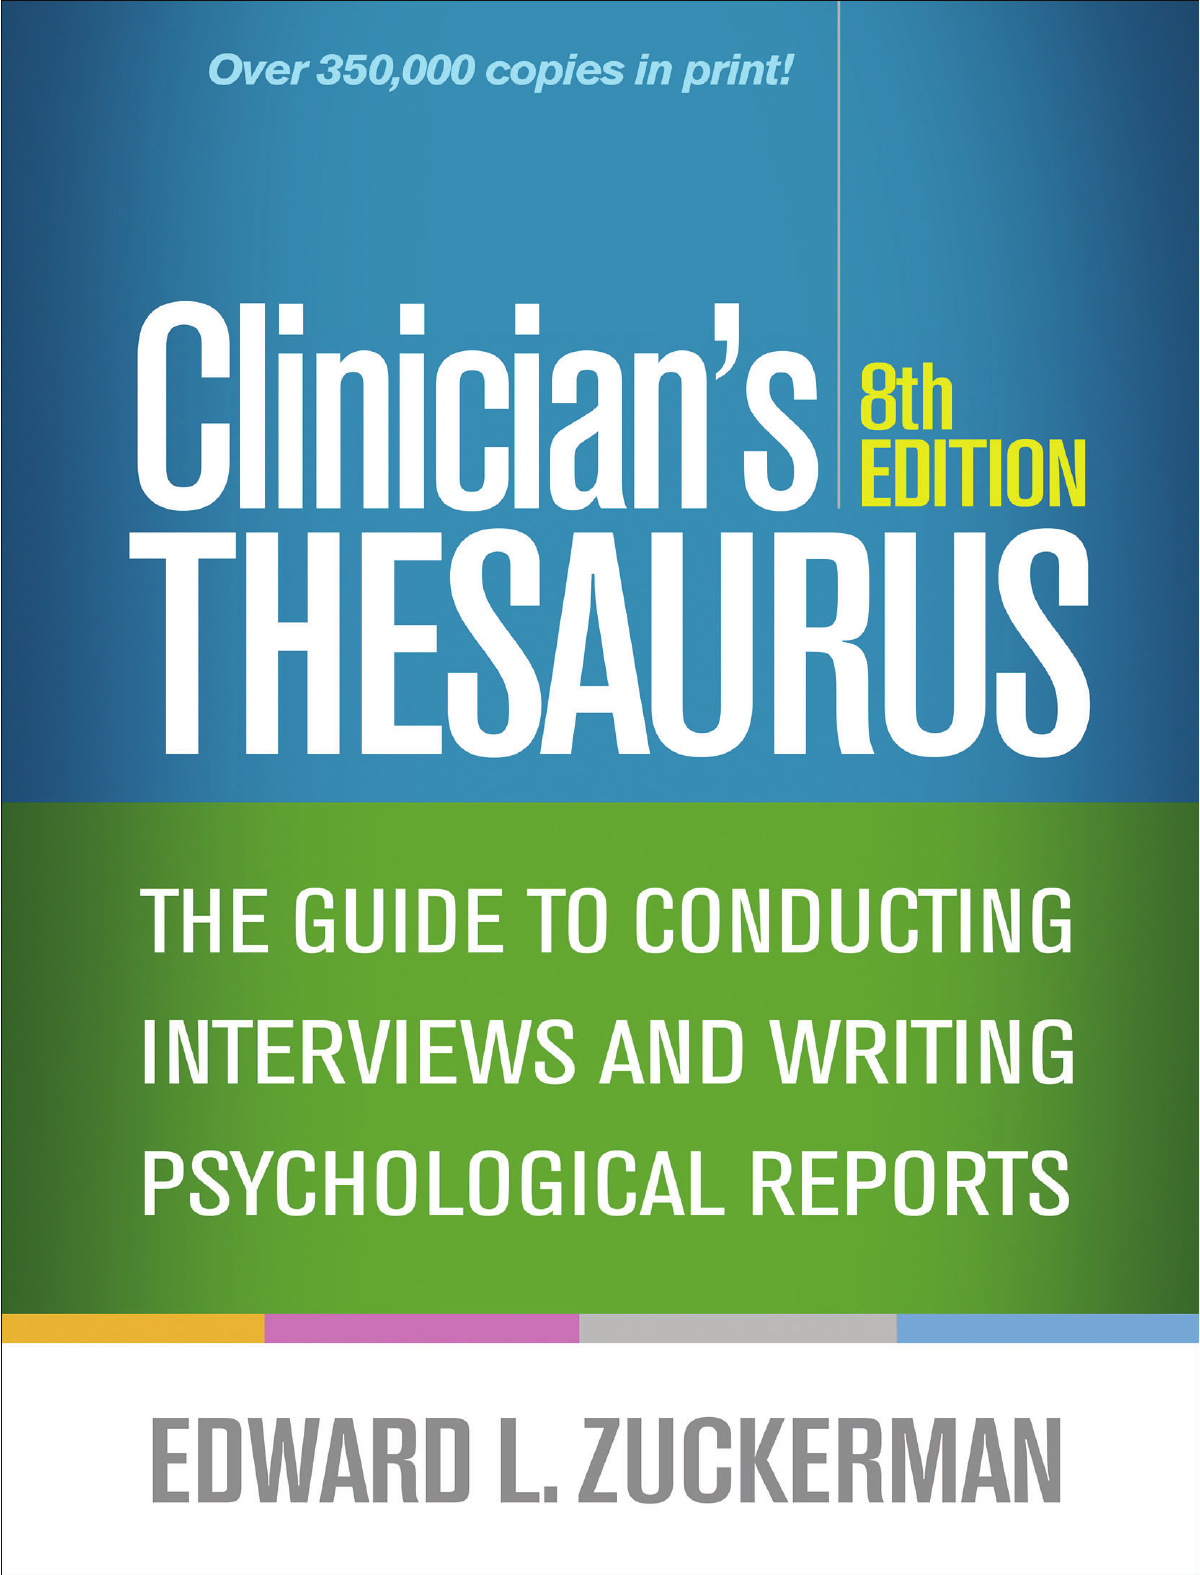 Clinicians Thesaurus 8th Edition The Guide to Conducting Interview picture